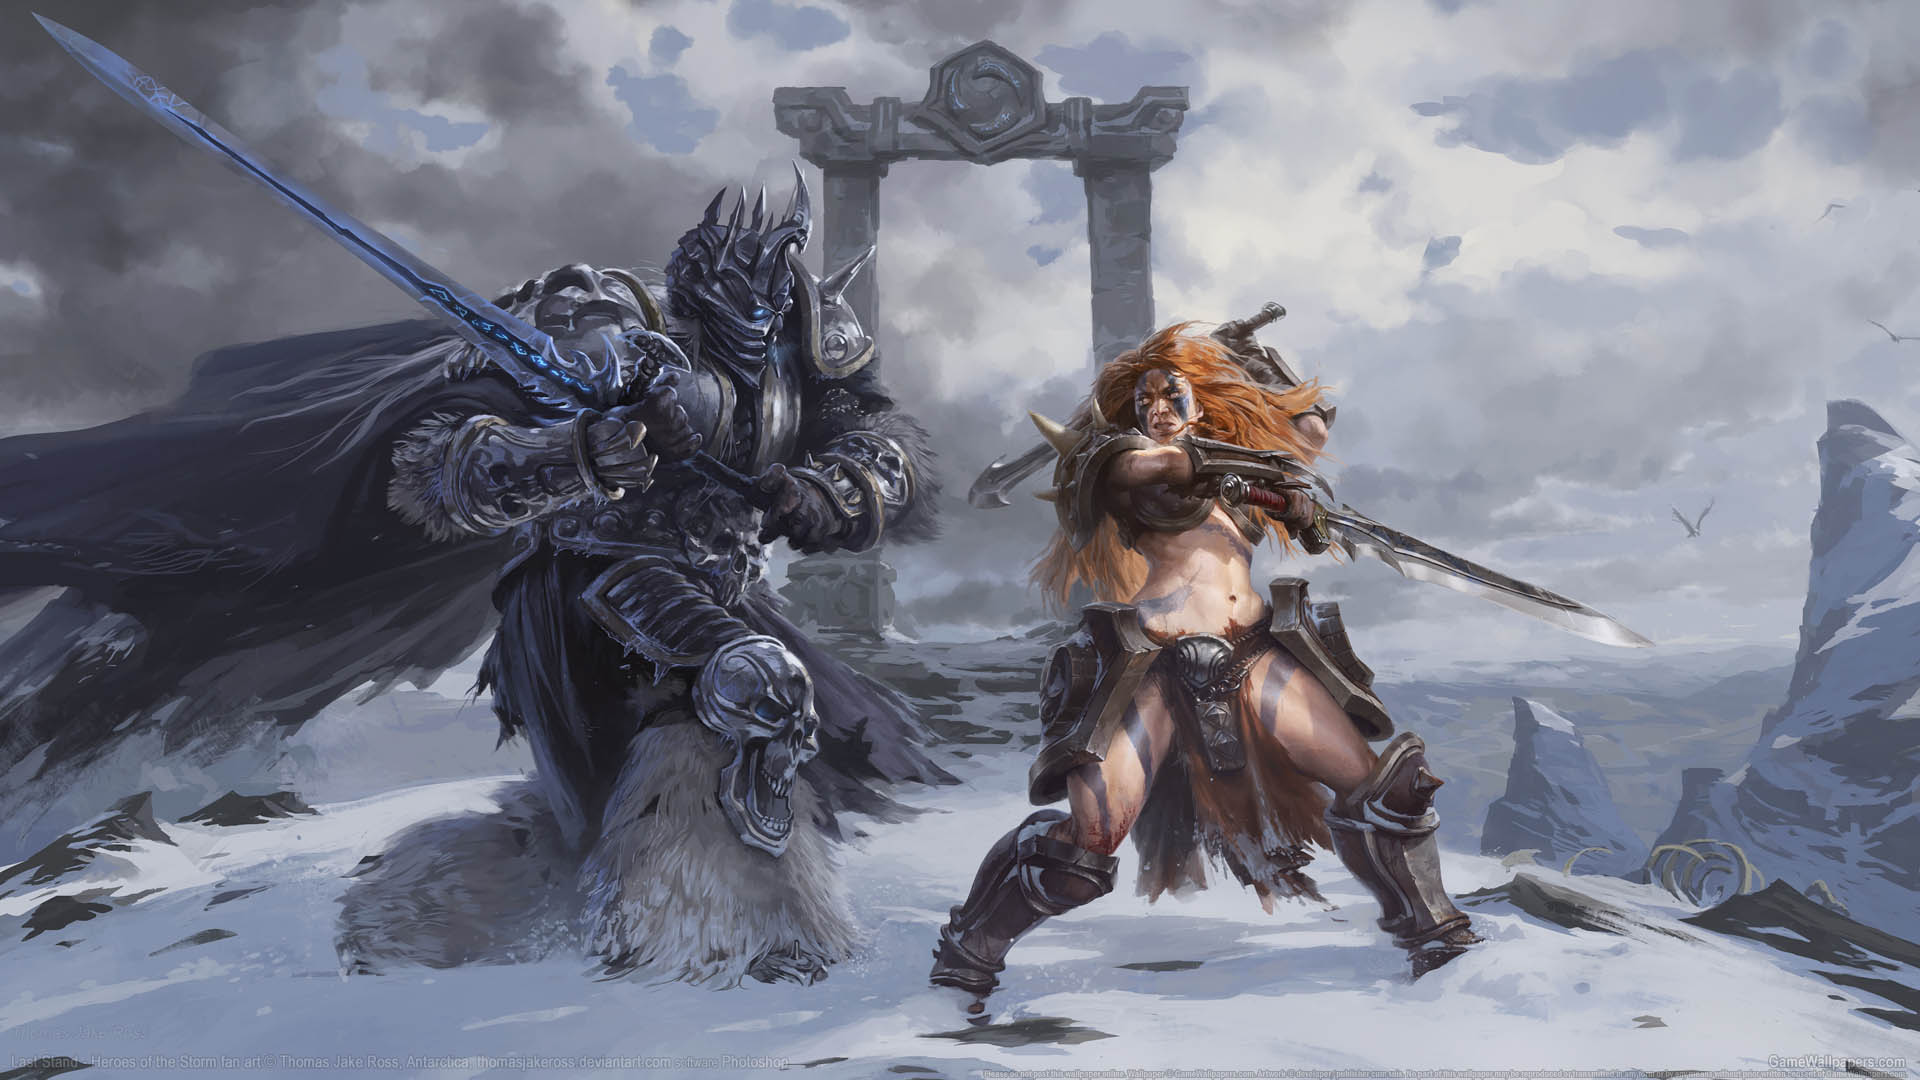 Heroes of the Storm fan art achtergrond 05 1920x1080